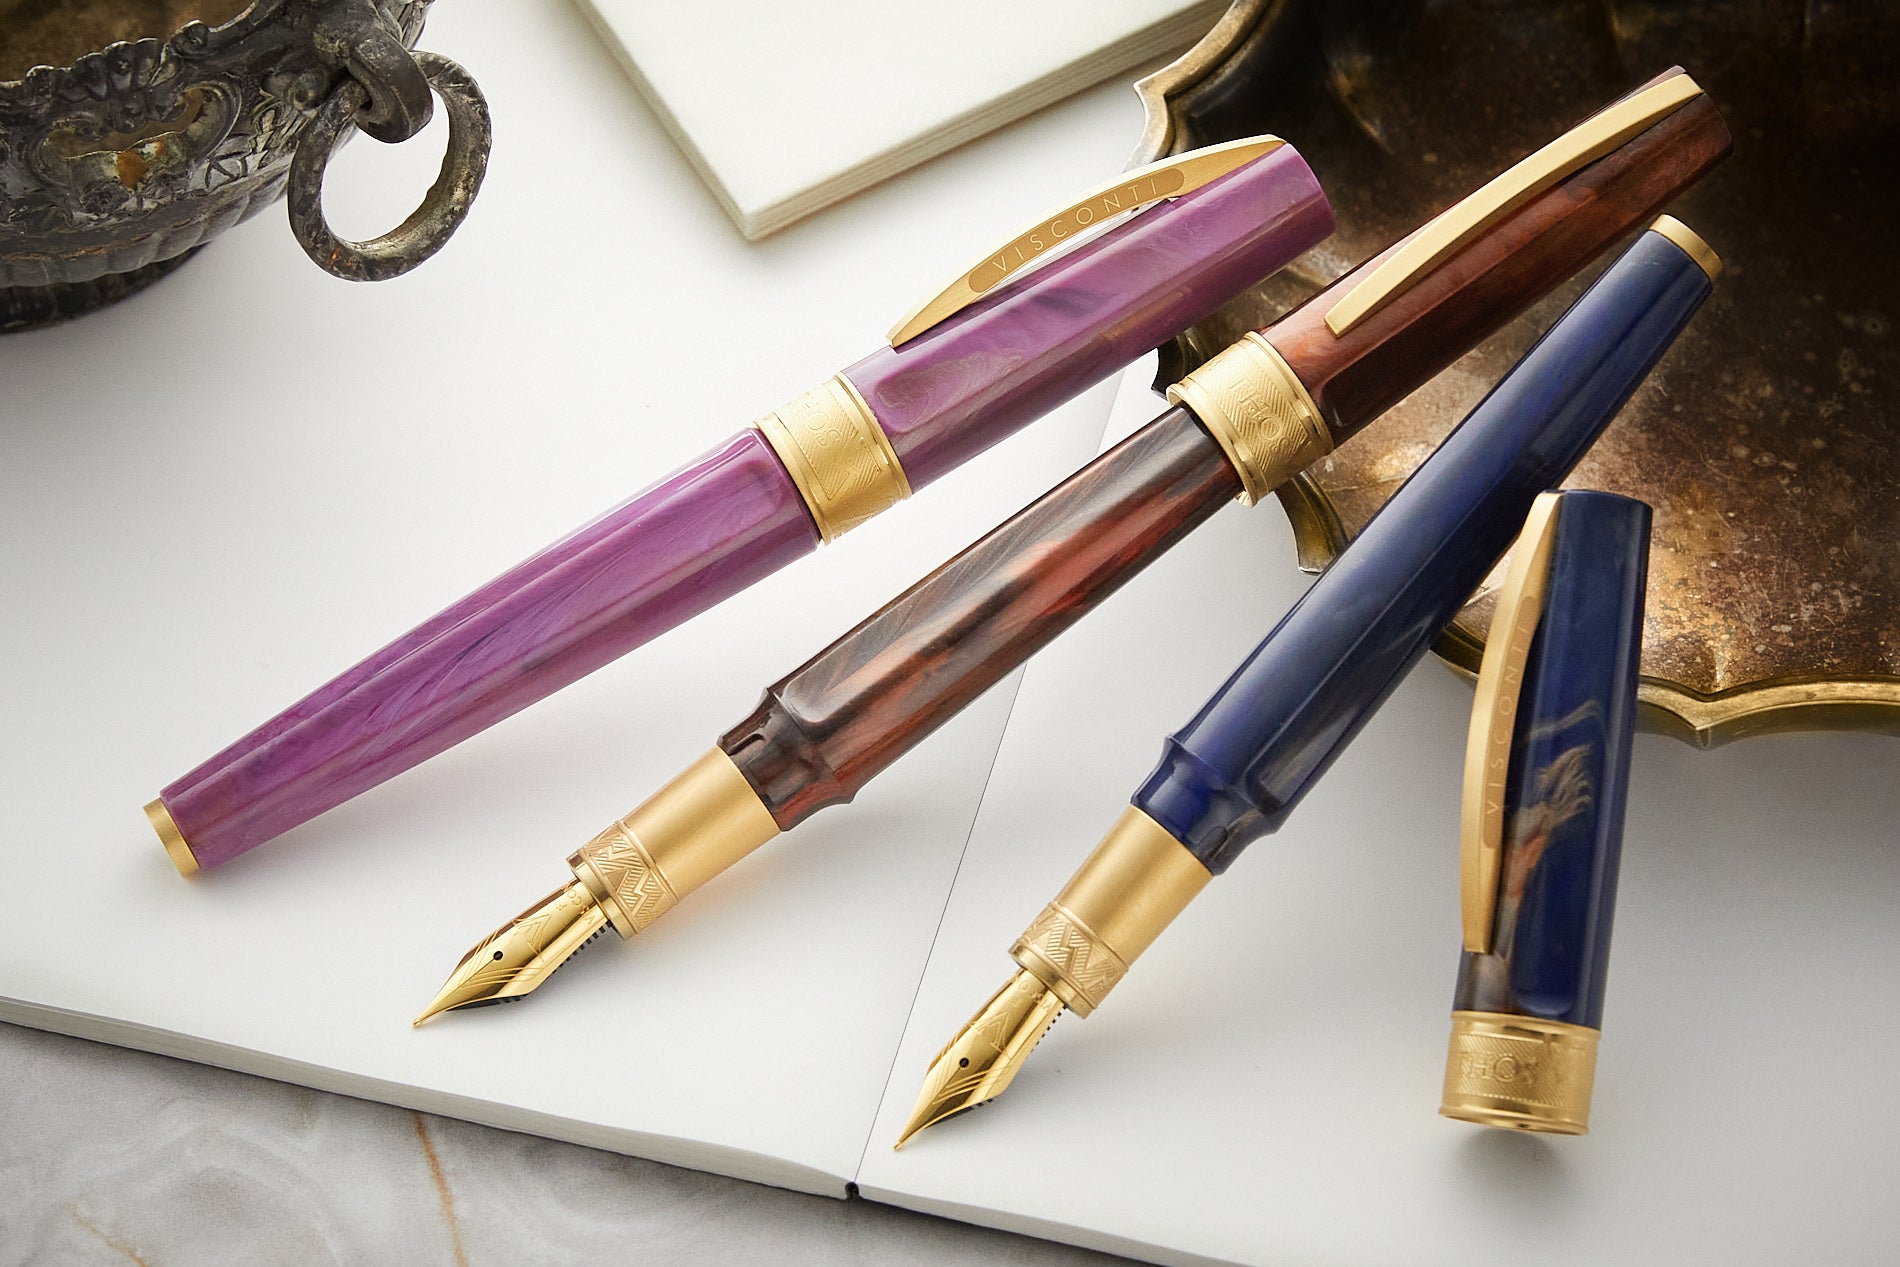 Visconti Mirage Mythos fountain pens in blue, brown and purple on white paper on top of a marble background